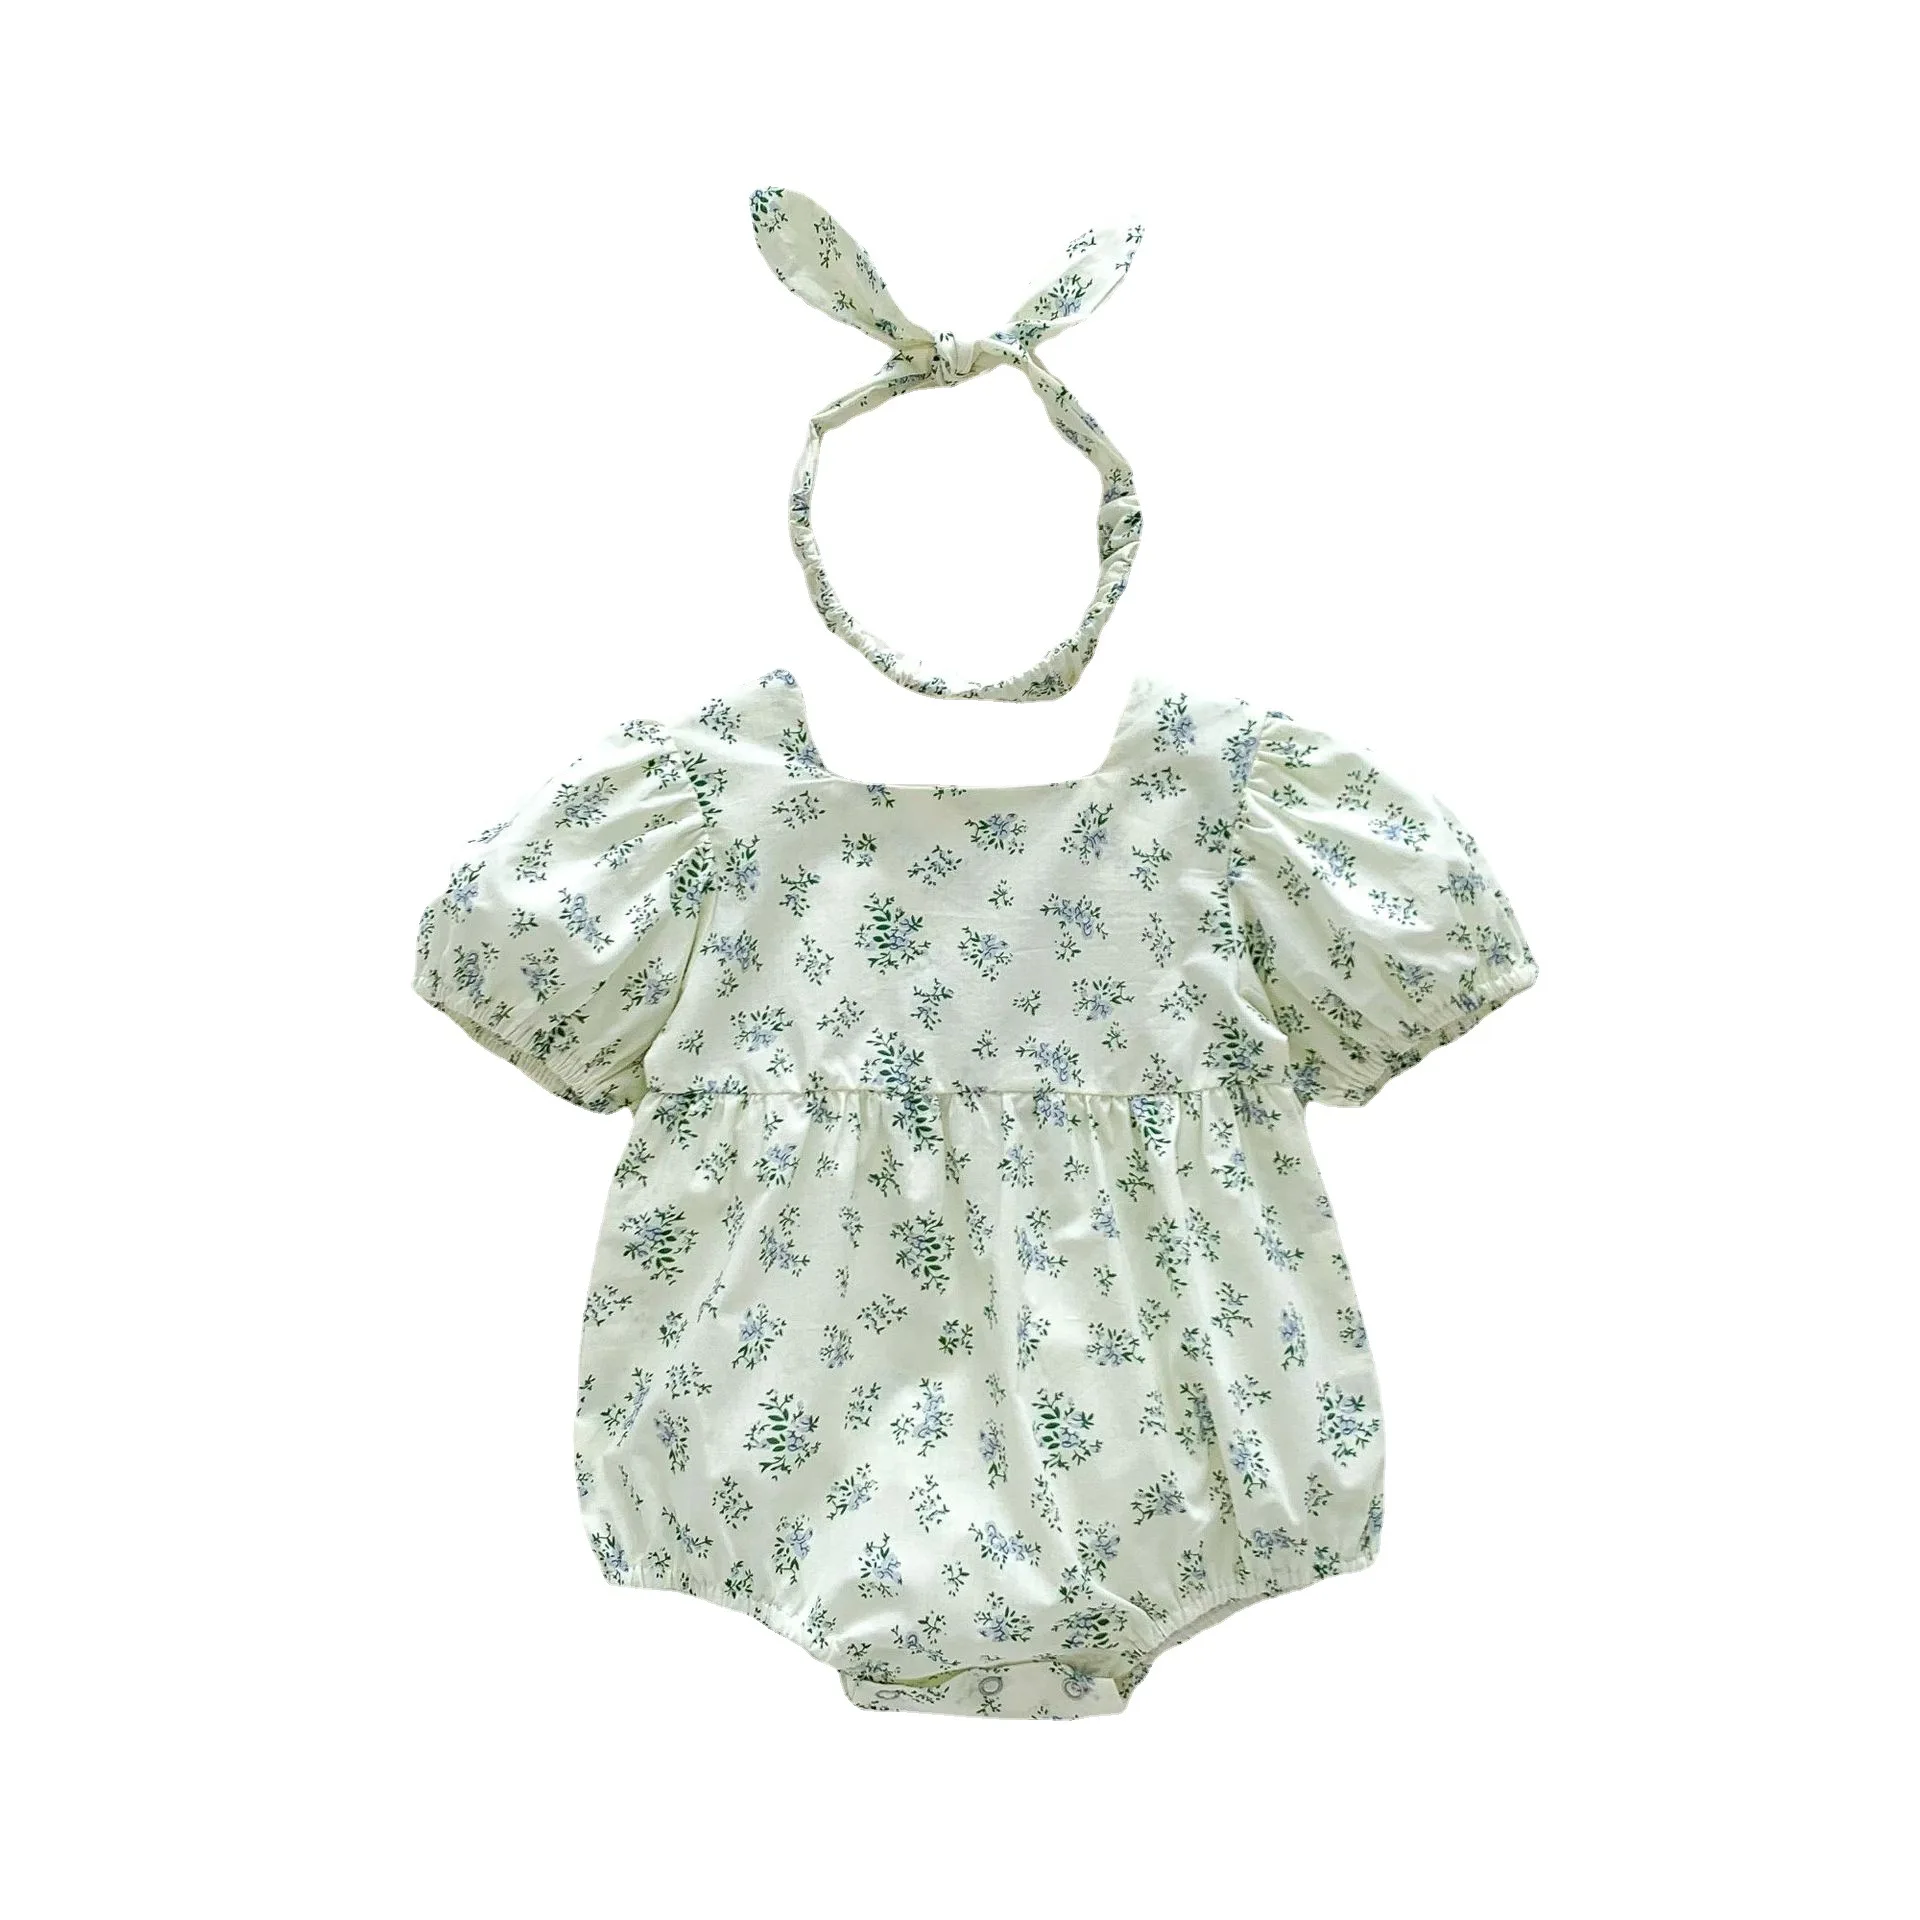 2023 new in summer newborn infant girls short sleeve floral cotton outdoor clothing kids baby jumpsuits bodysuits gift headbands images - 6